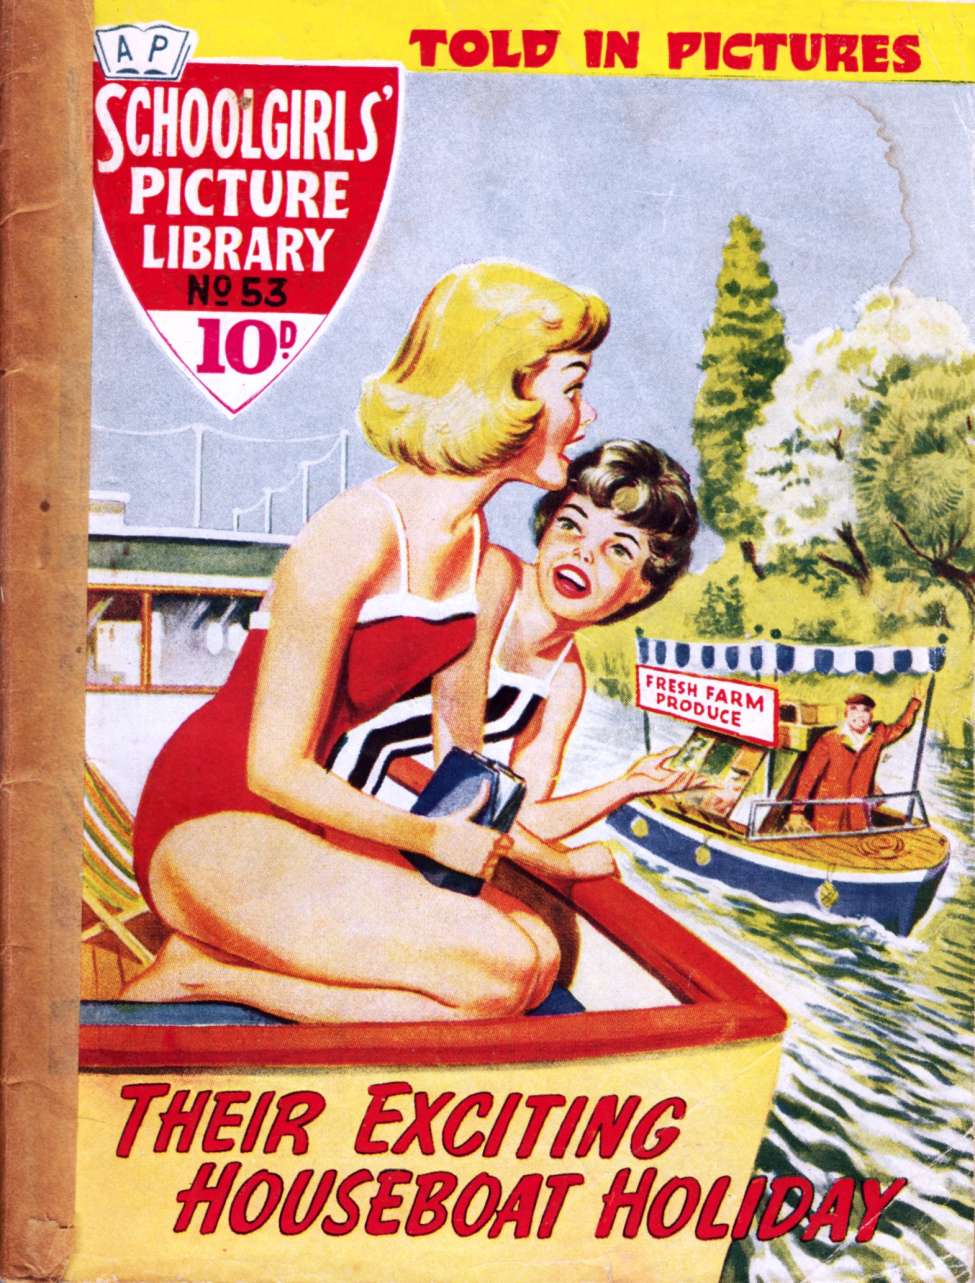 Book Cover For Schoolgirls' Picture Library 53 - Their Exciting Houseboat Holiday